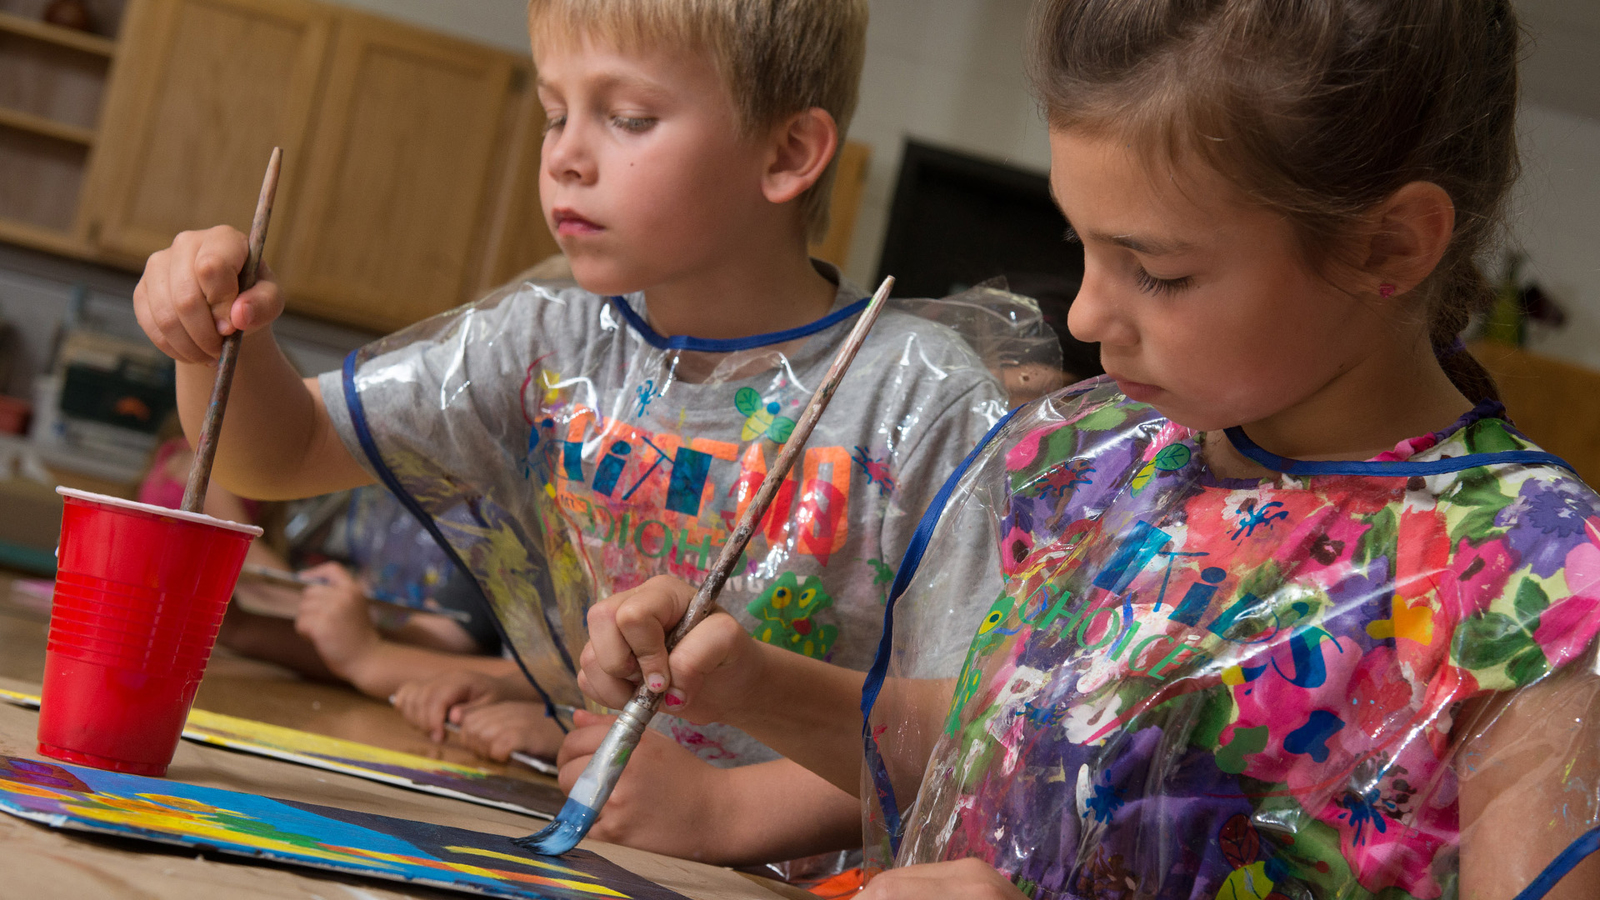 Children painting with watercolors